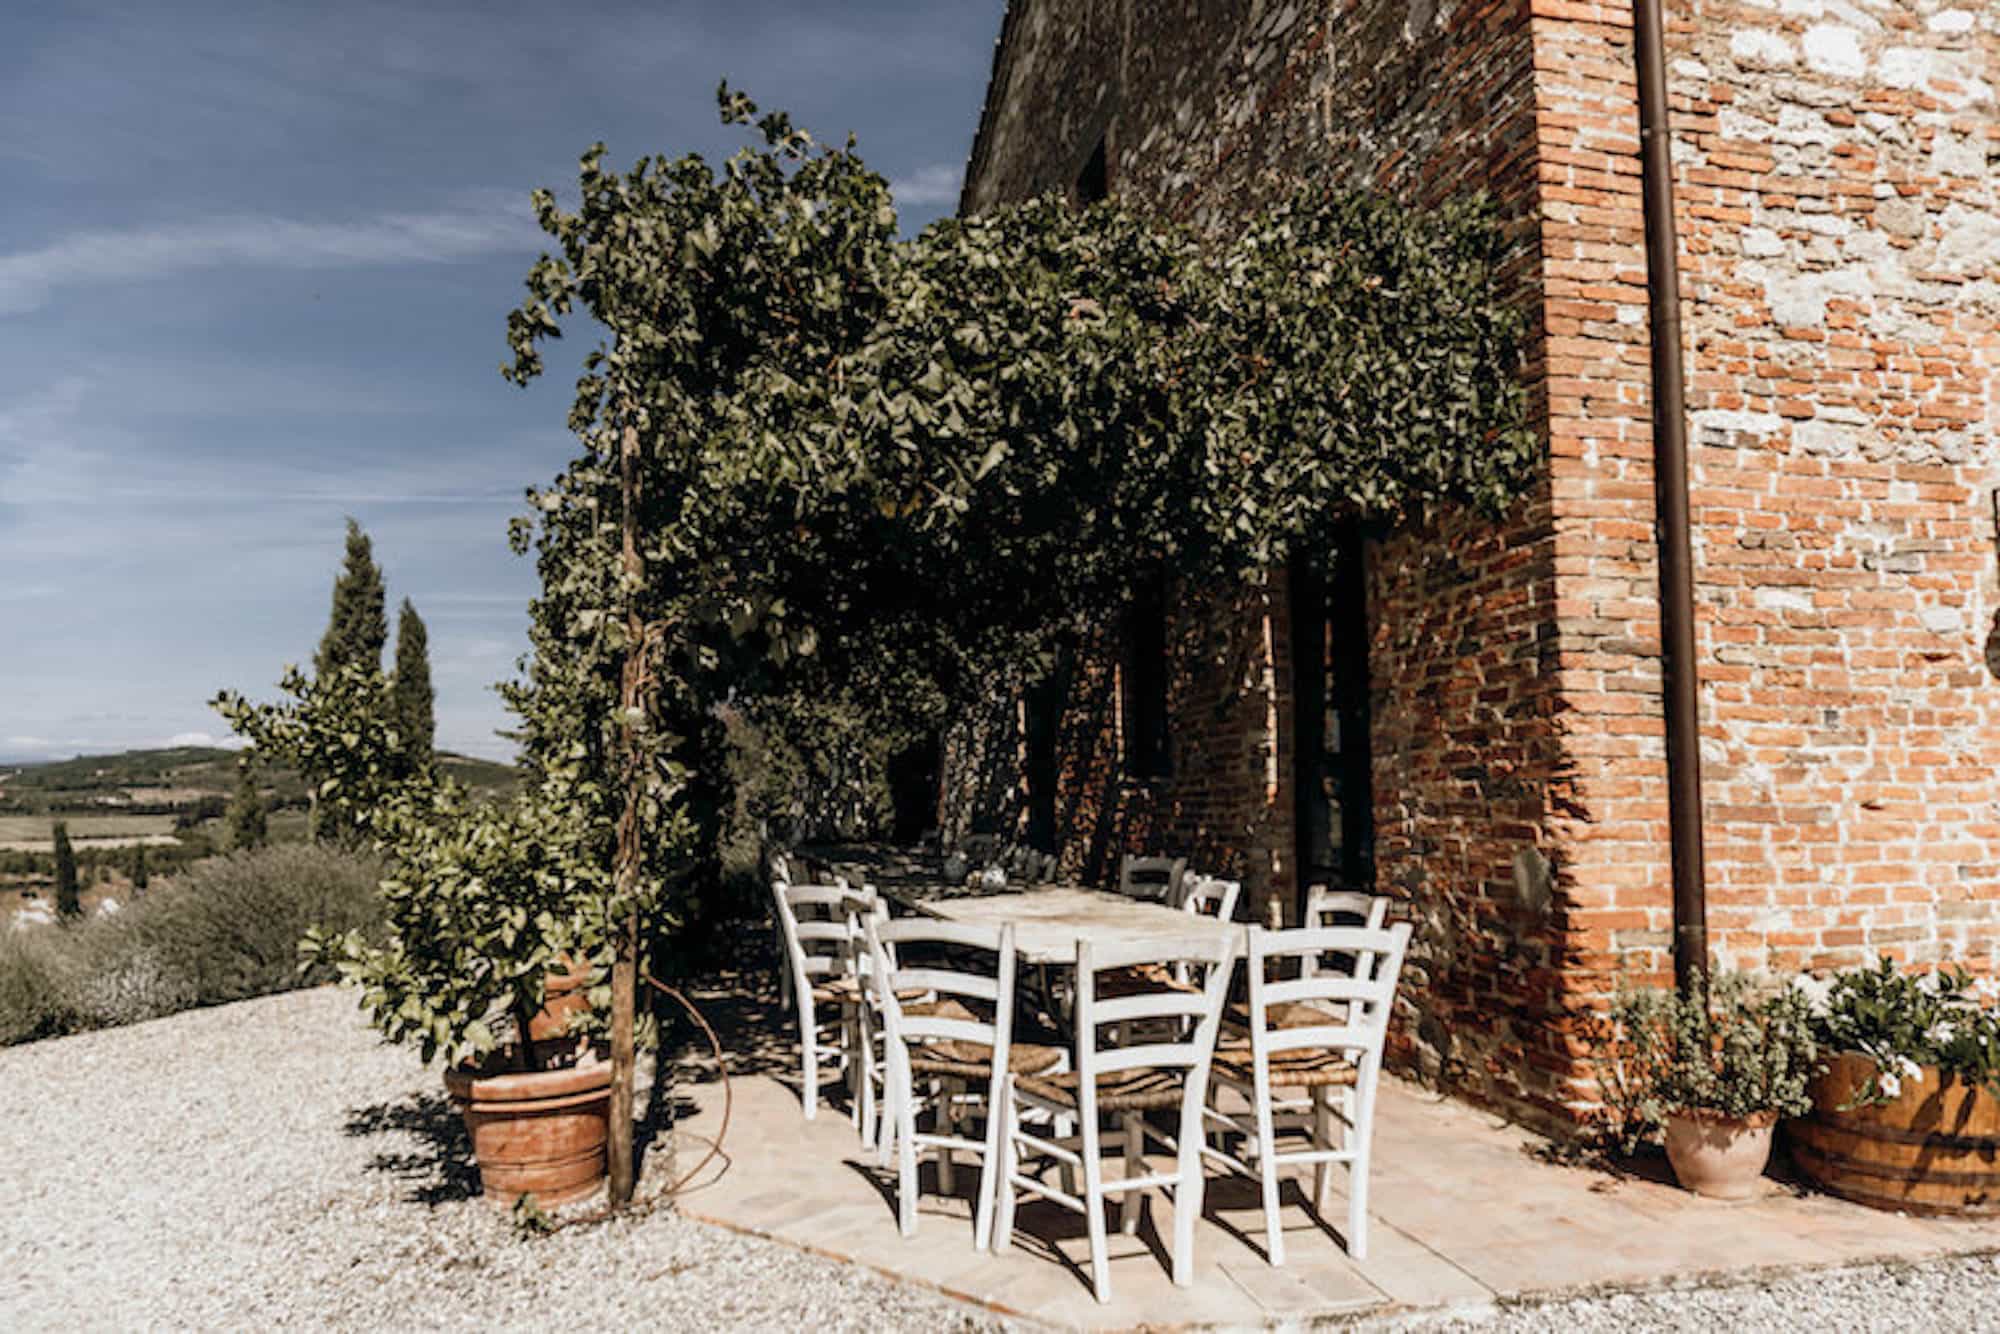 Tuscany Wedding Venues | A Guide for your Tuscany Elopement